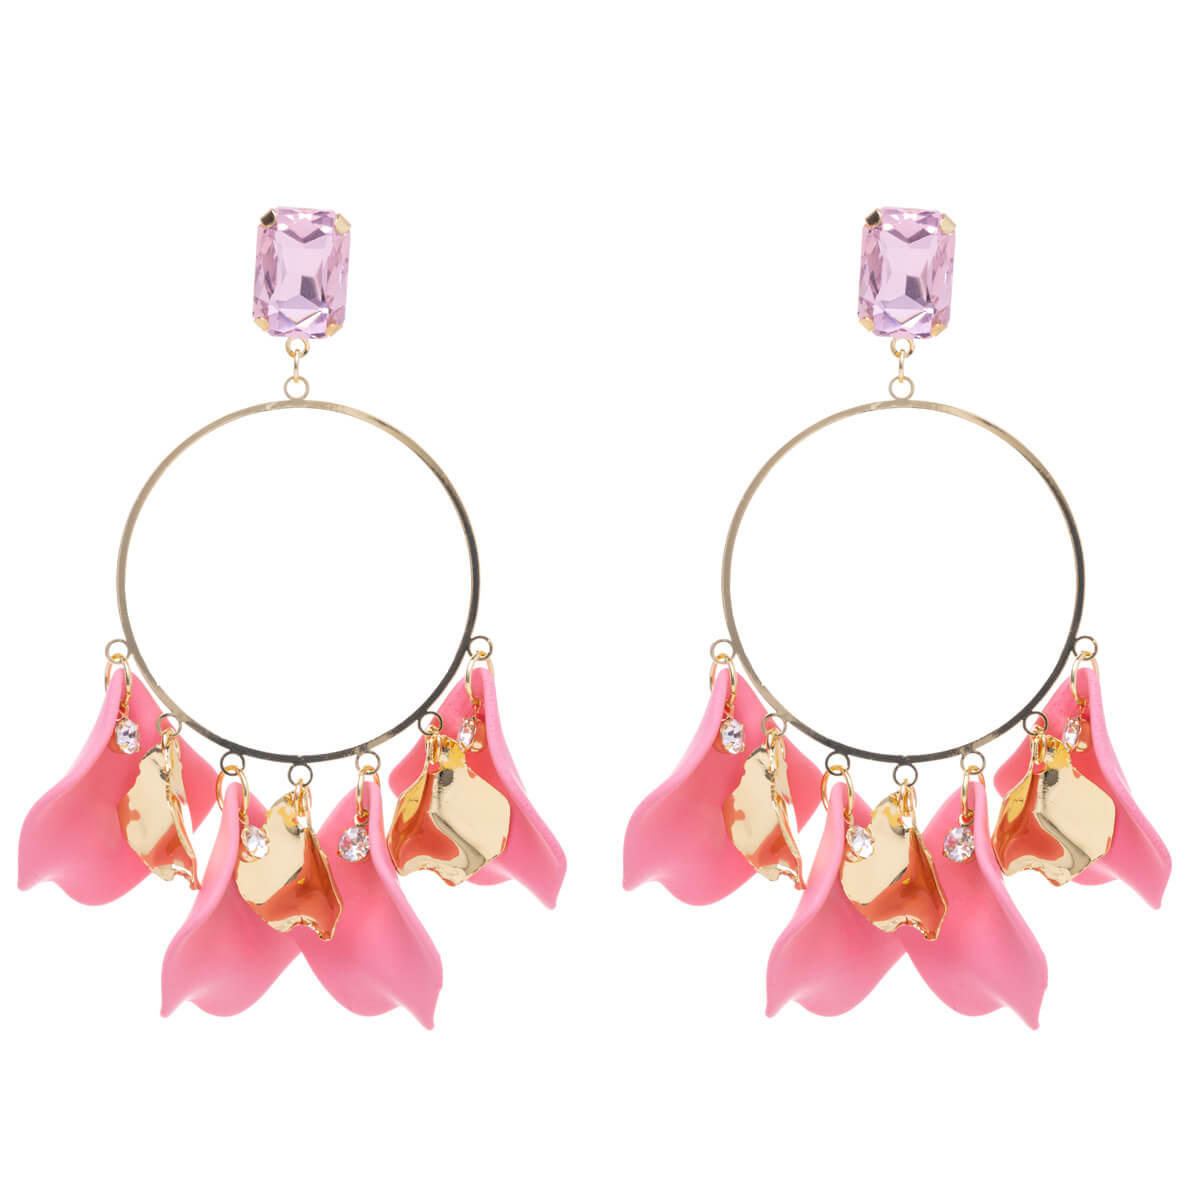 Big round earrings with hanging decorations